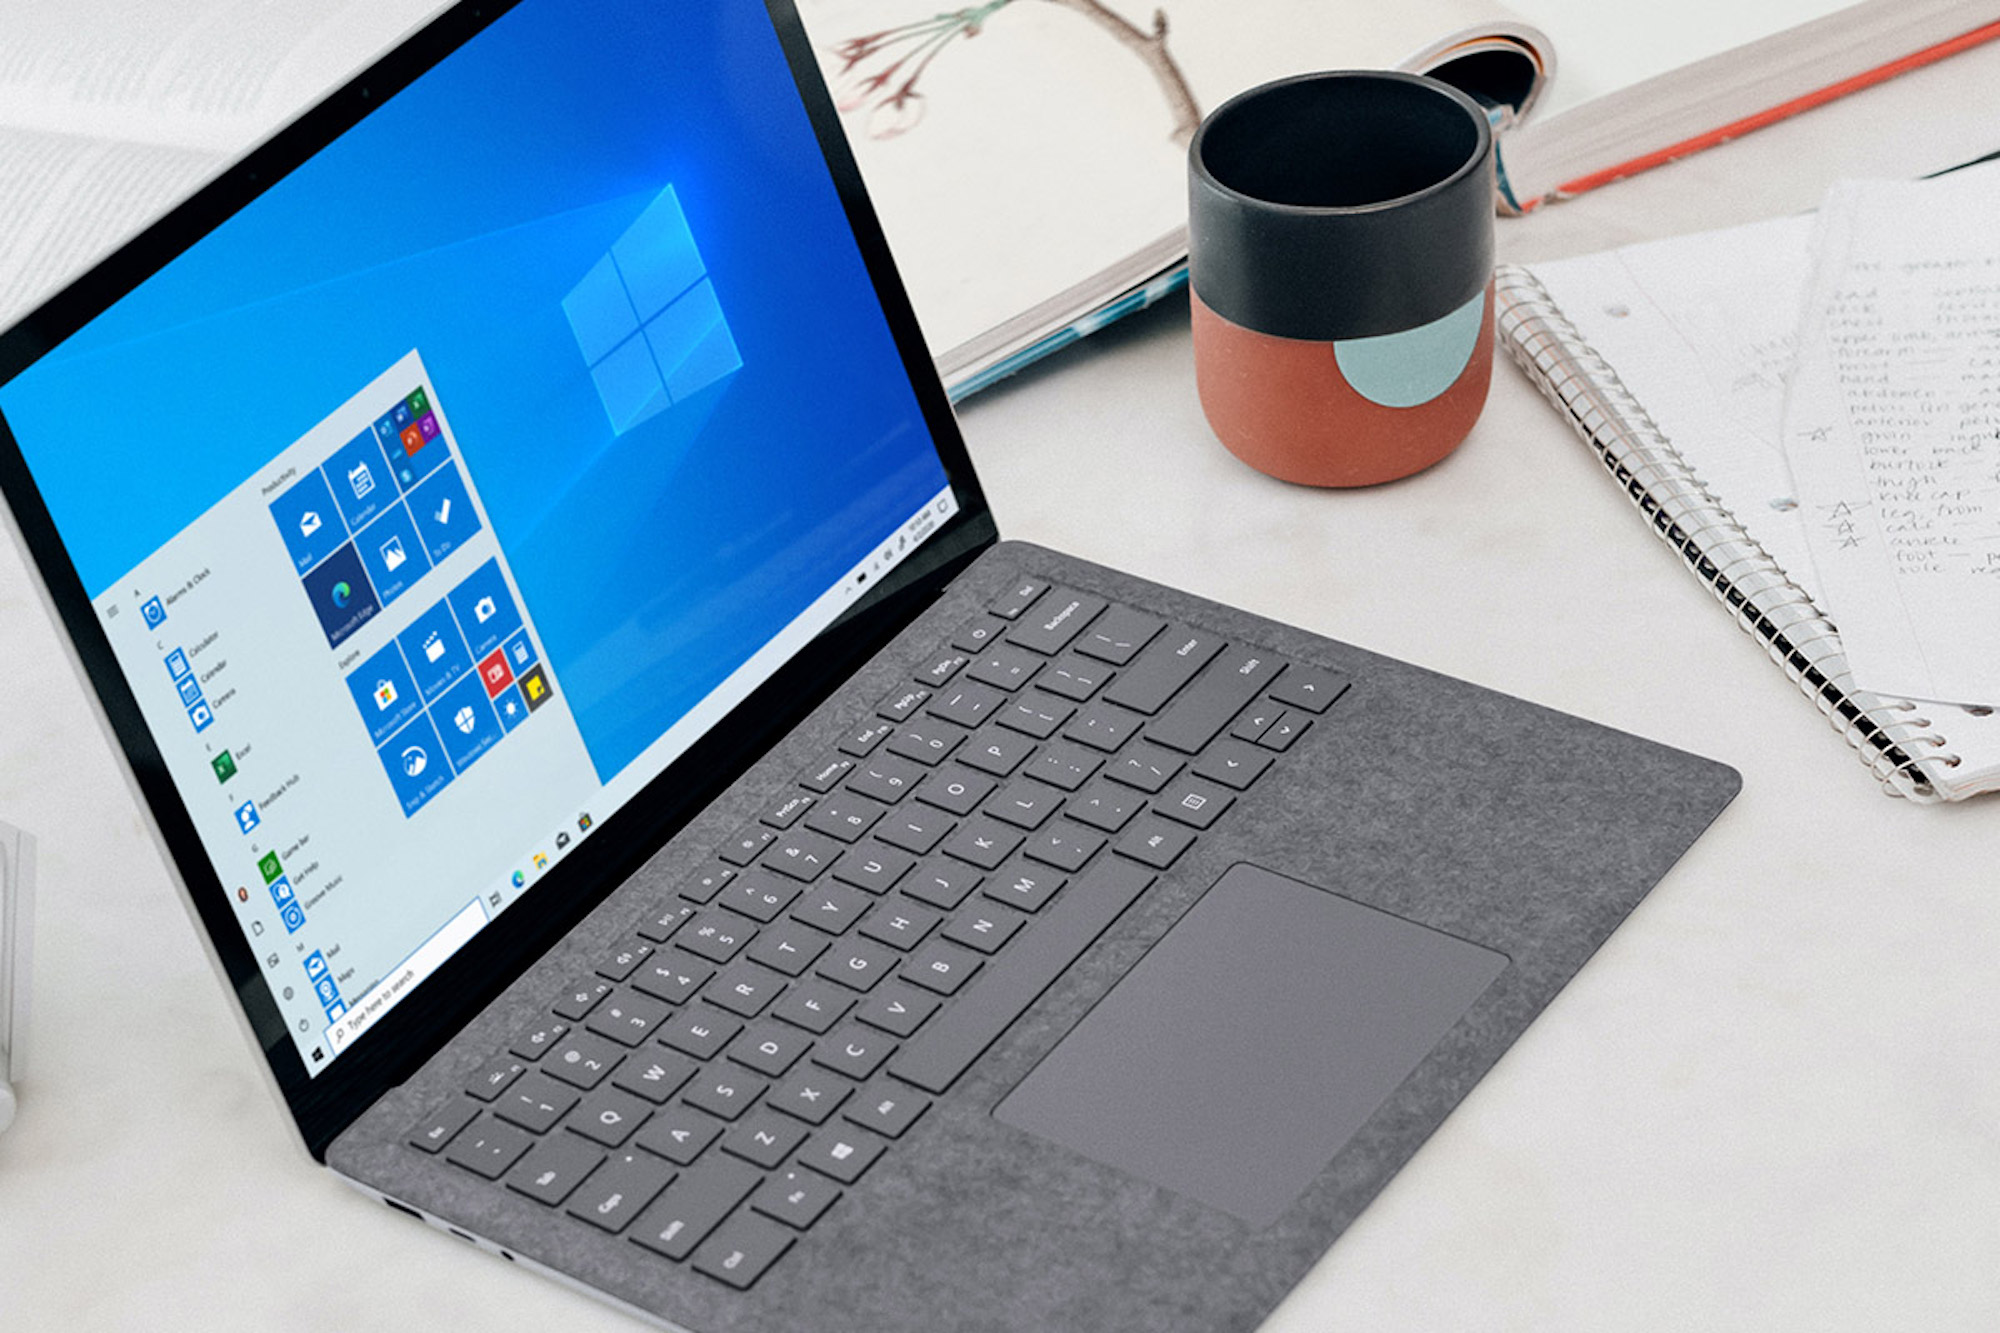 This Microsoft Office Pro 2021 and Windows 11 Pro bundle drops to